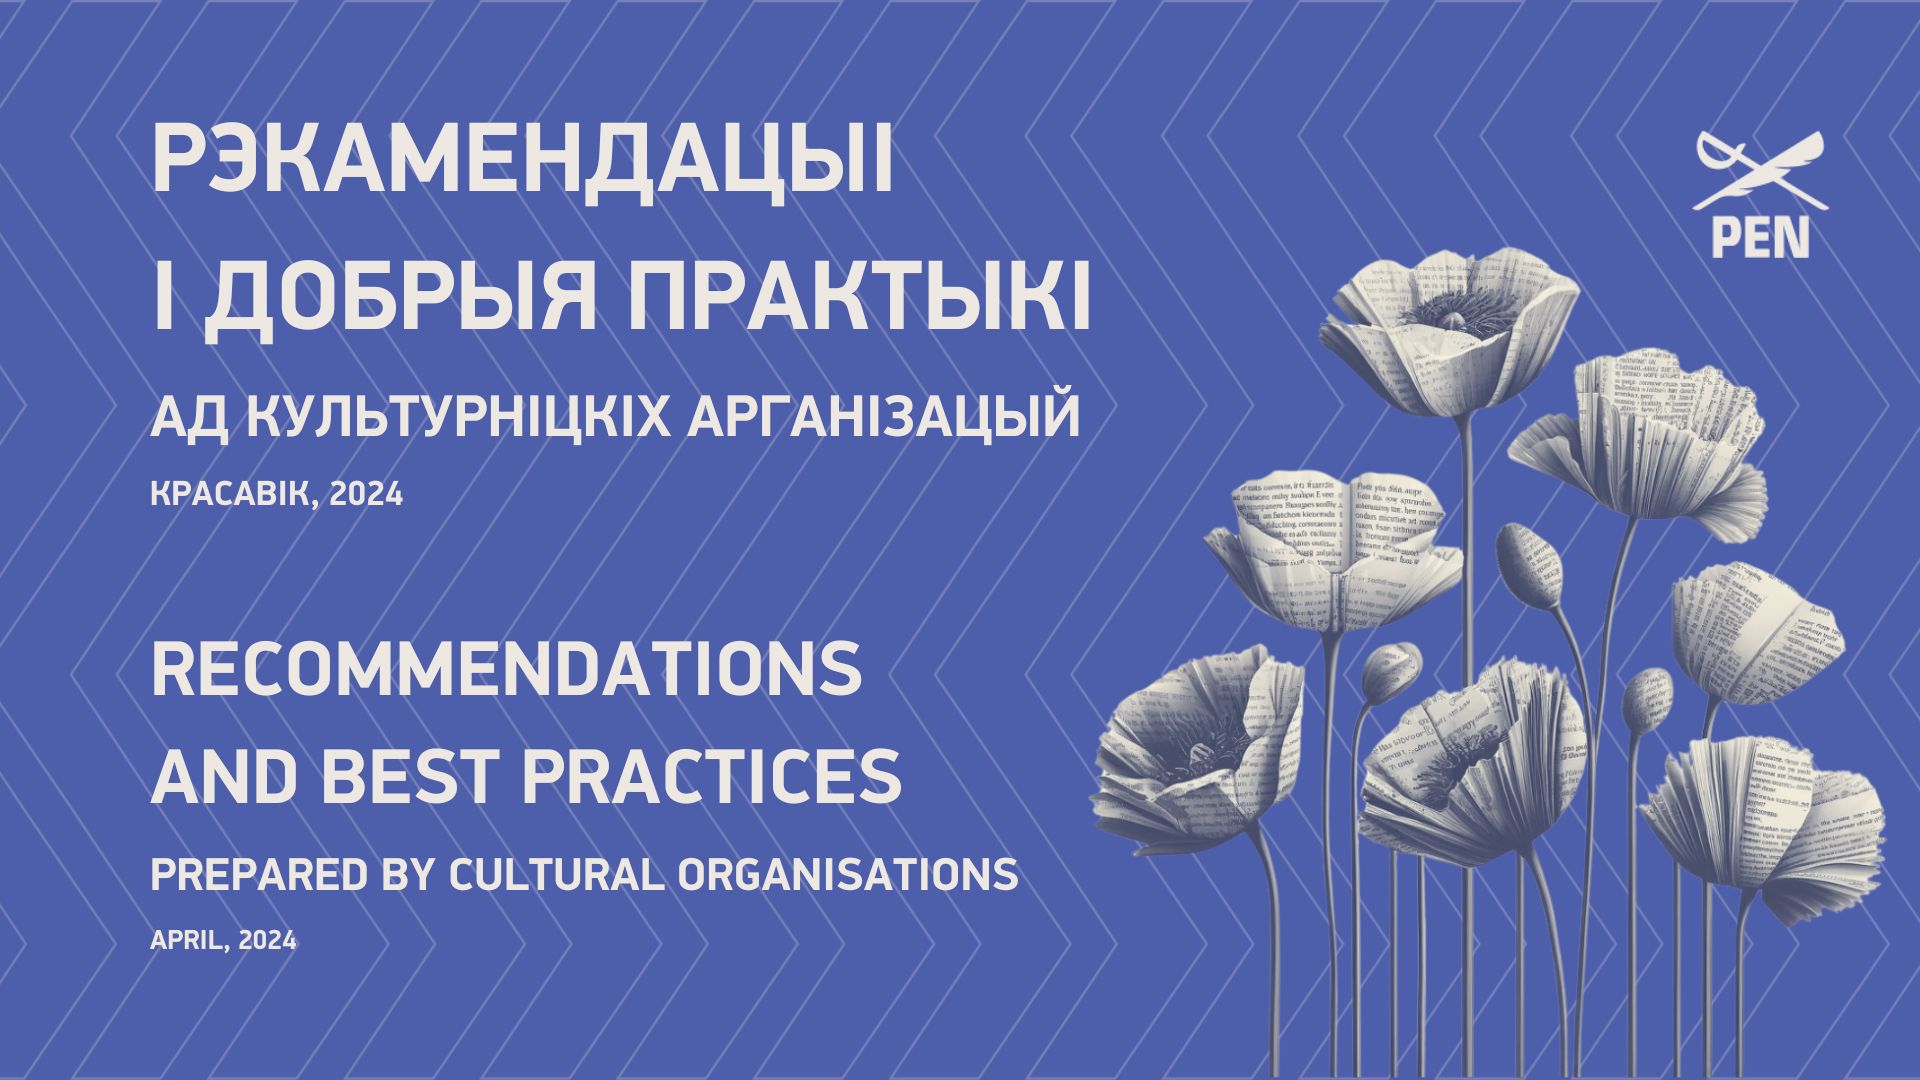 Recommendations and best practices prepared by cultural organisations. April, 2024